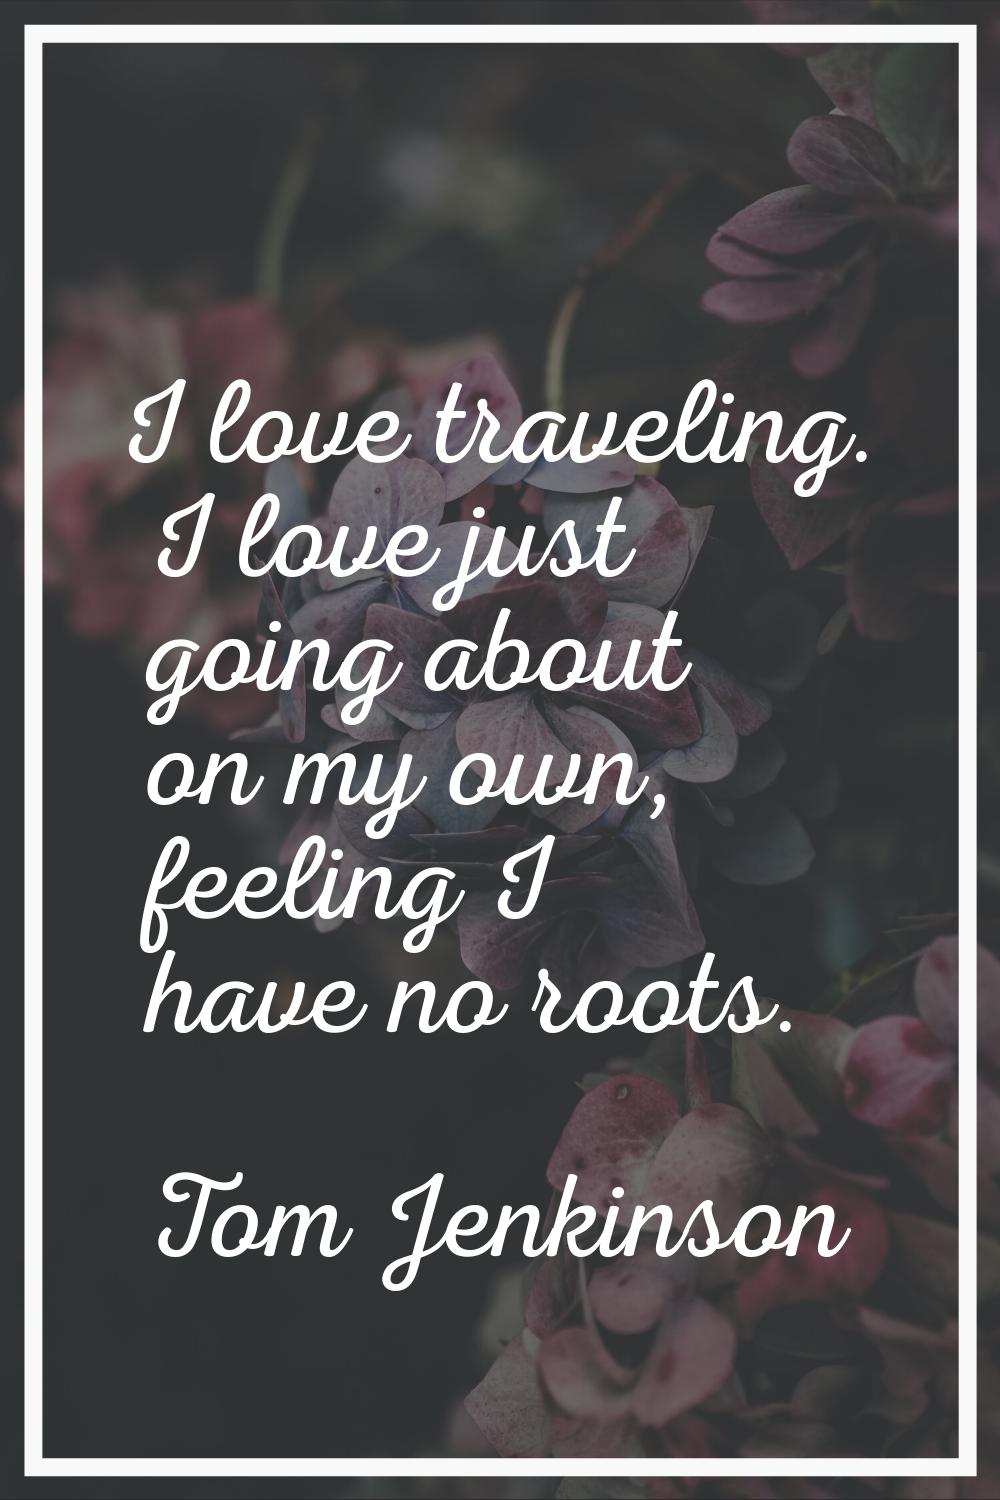 I love traveling. I love just going about on my own, feeling I have no roots.